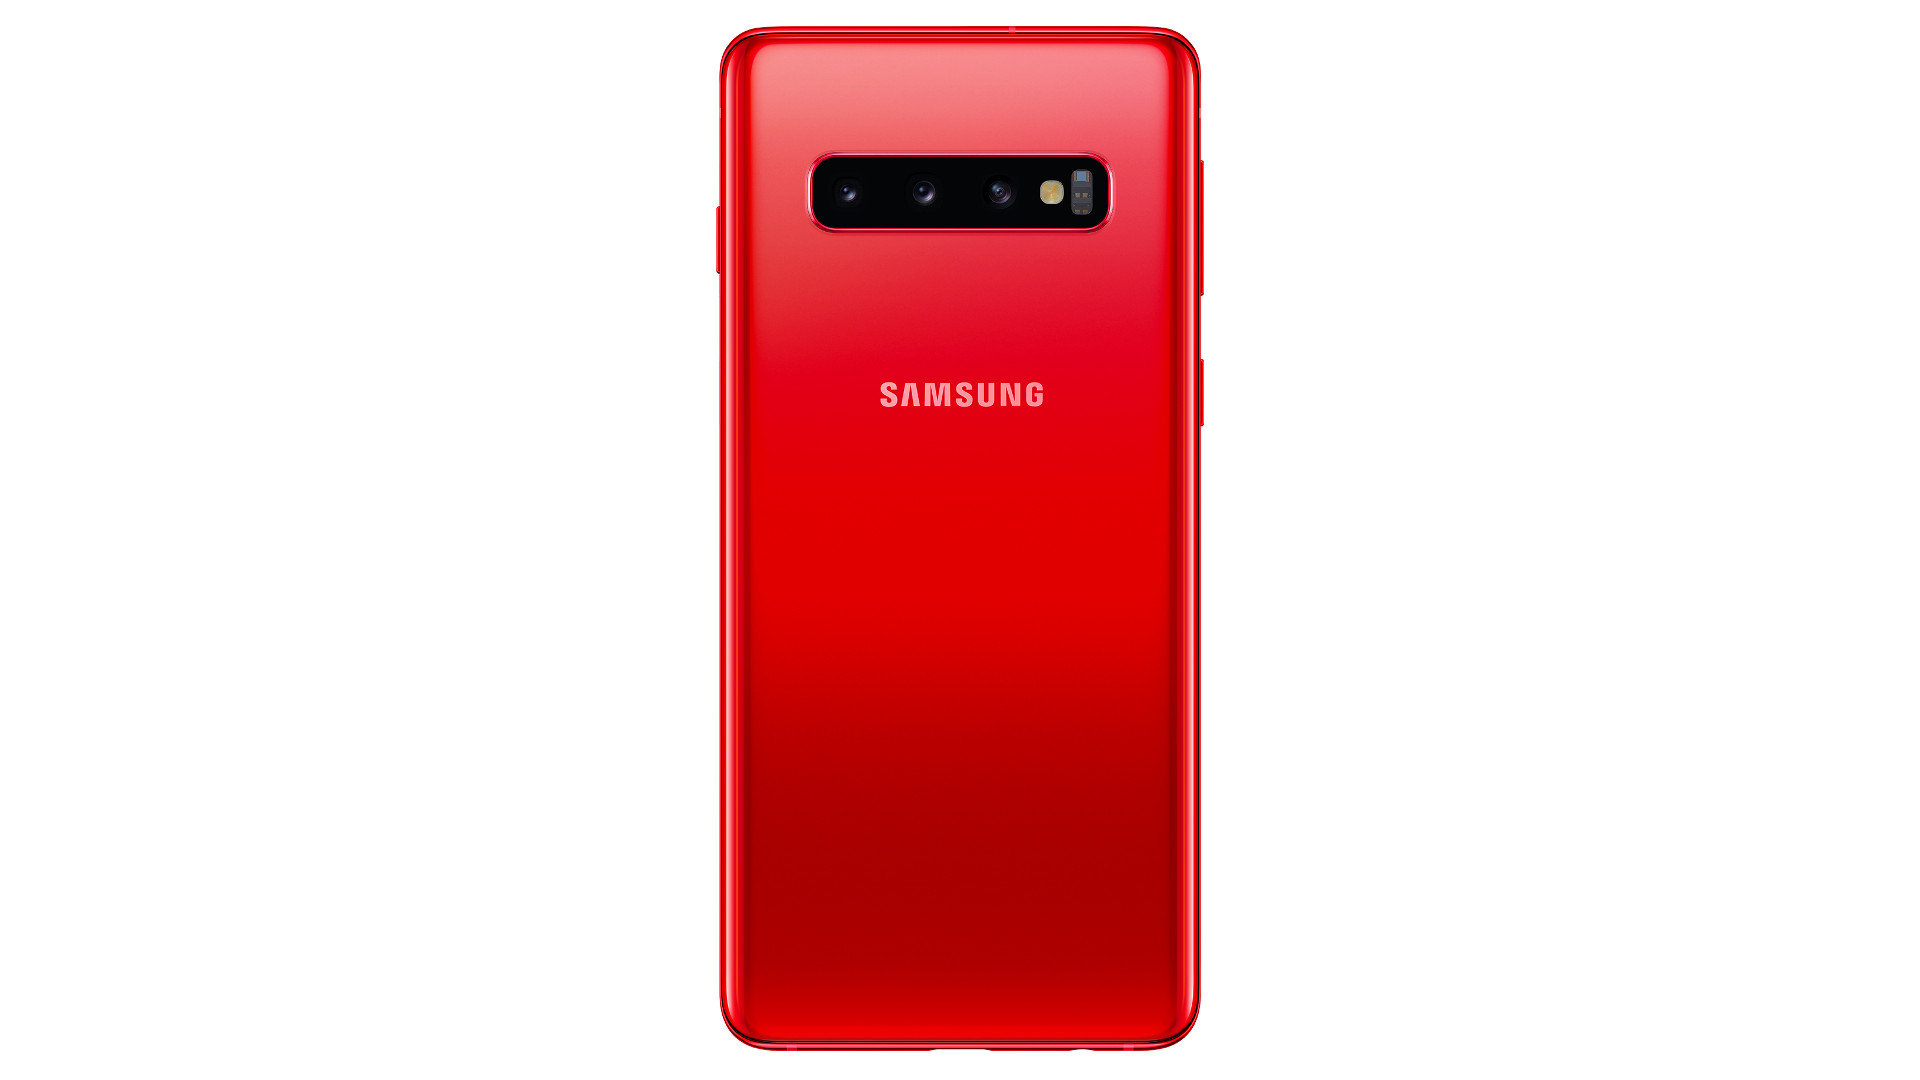 Samsung Galaxy S10 series now officially available in Cardinal Red